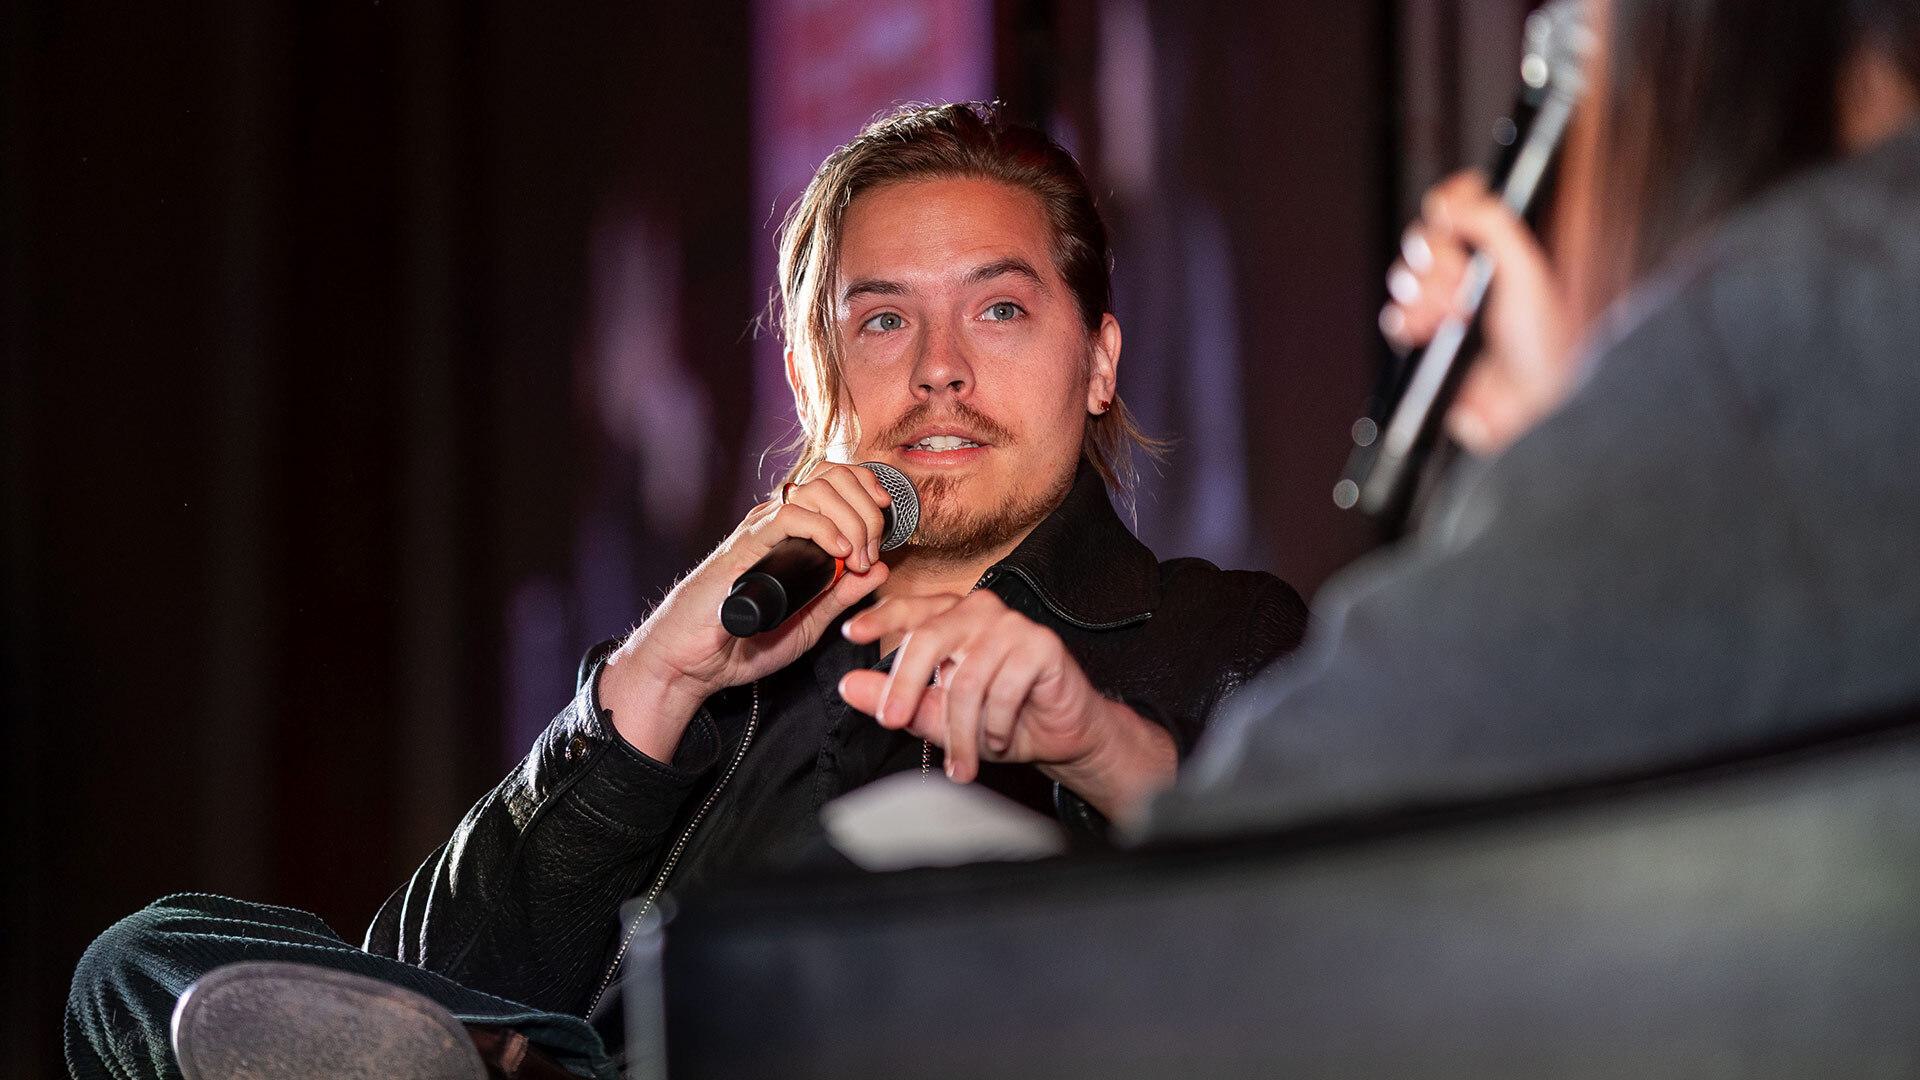 Dylan Sprouse talks on stage